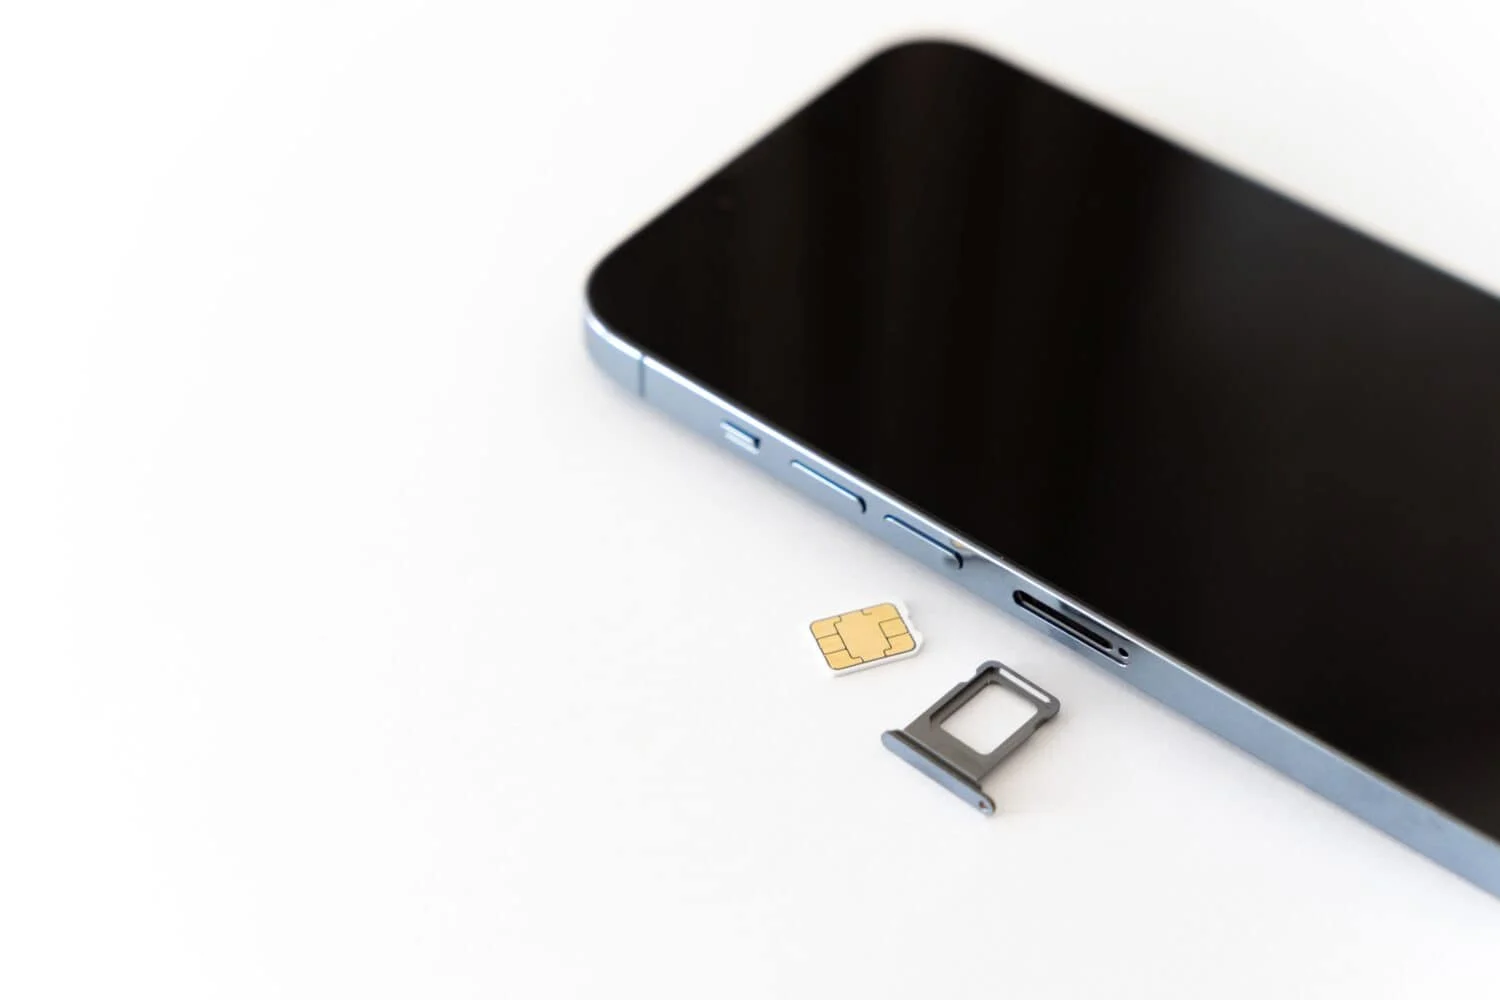 identifying-the-sim-card-slot-on-iphone-7